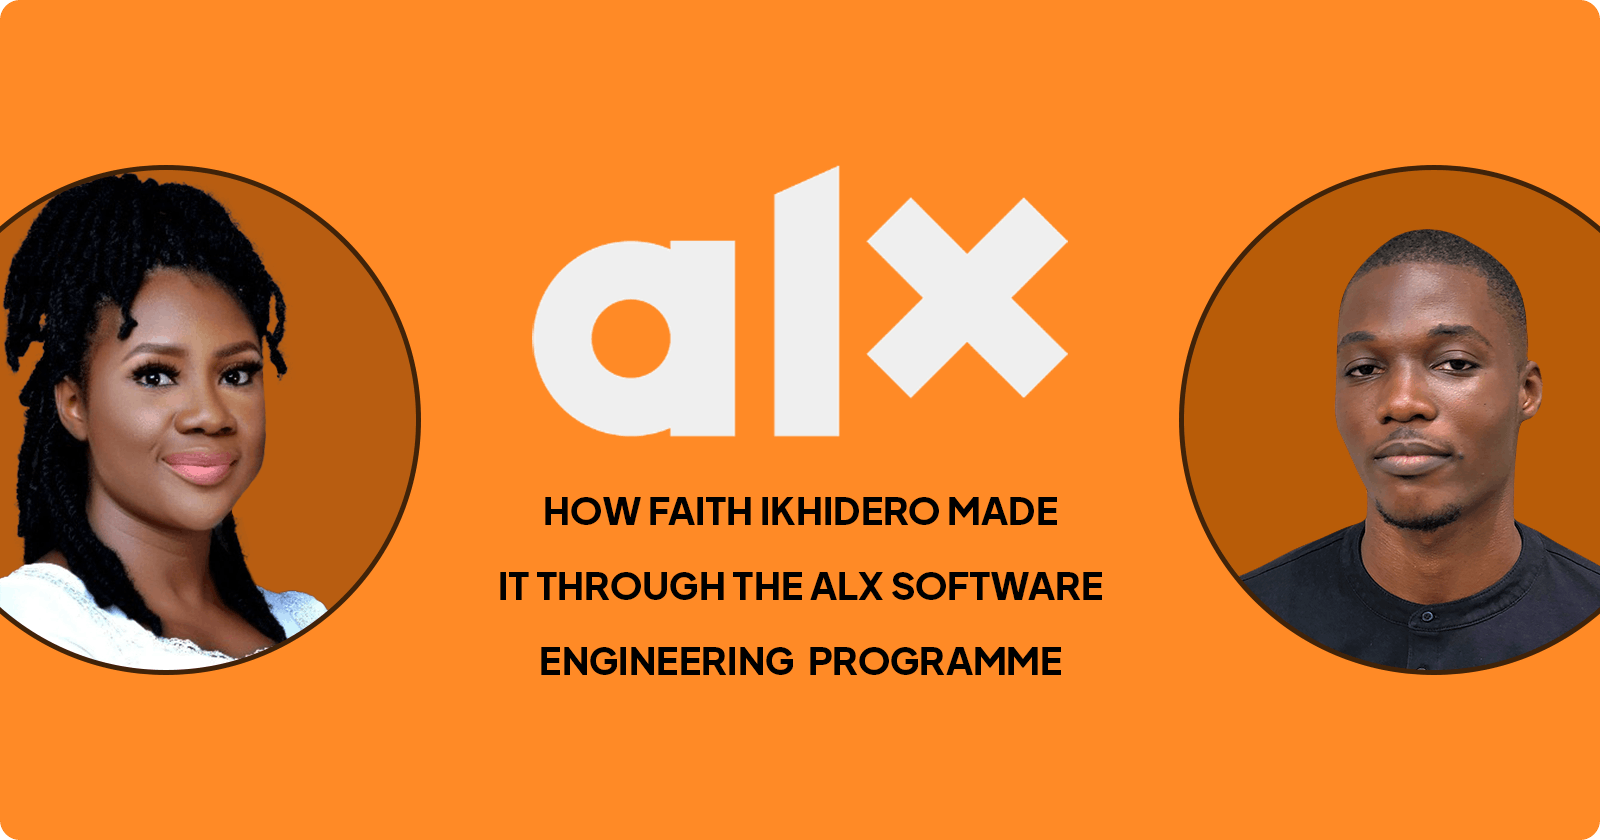 How Faith Ikhidero made it through the ALX software engineering programme